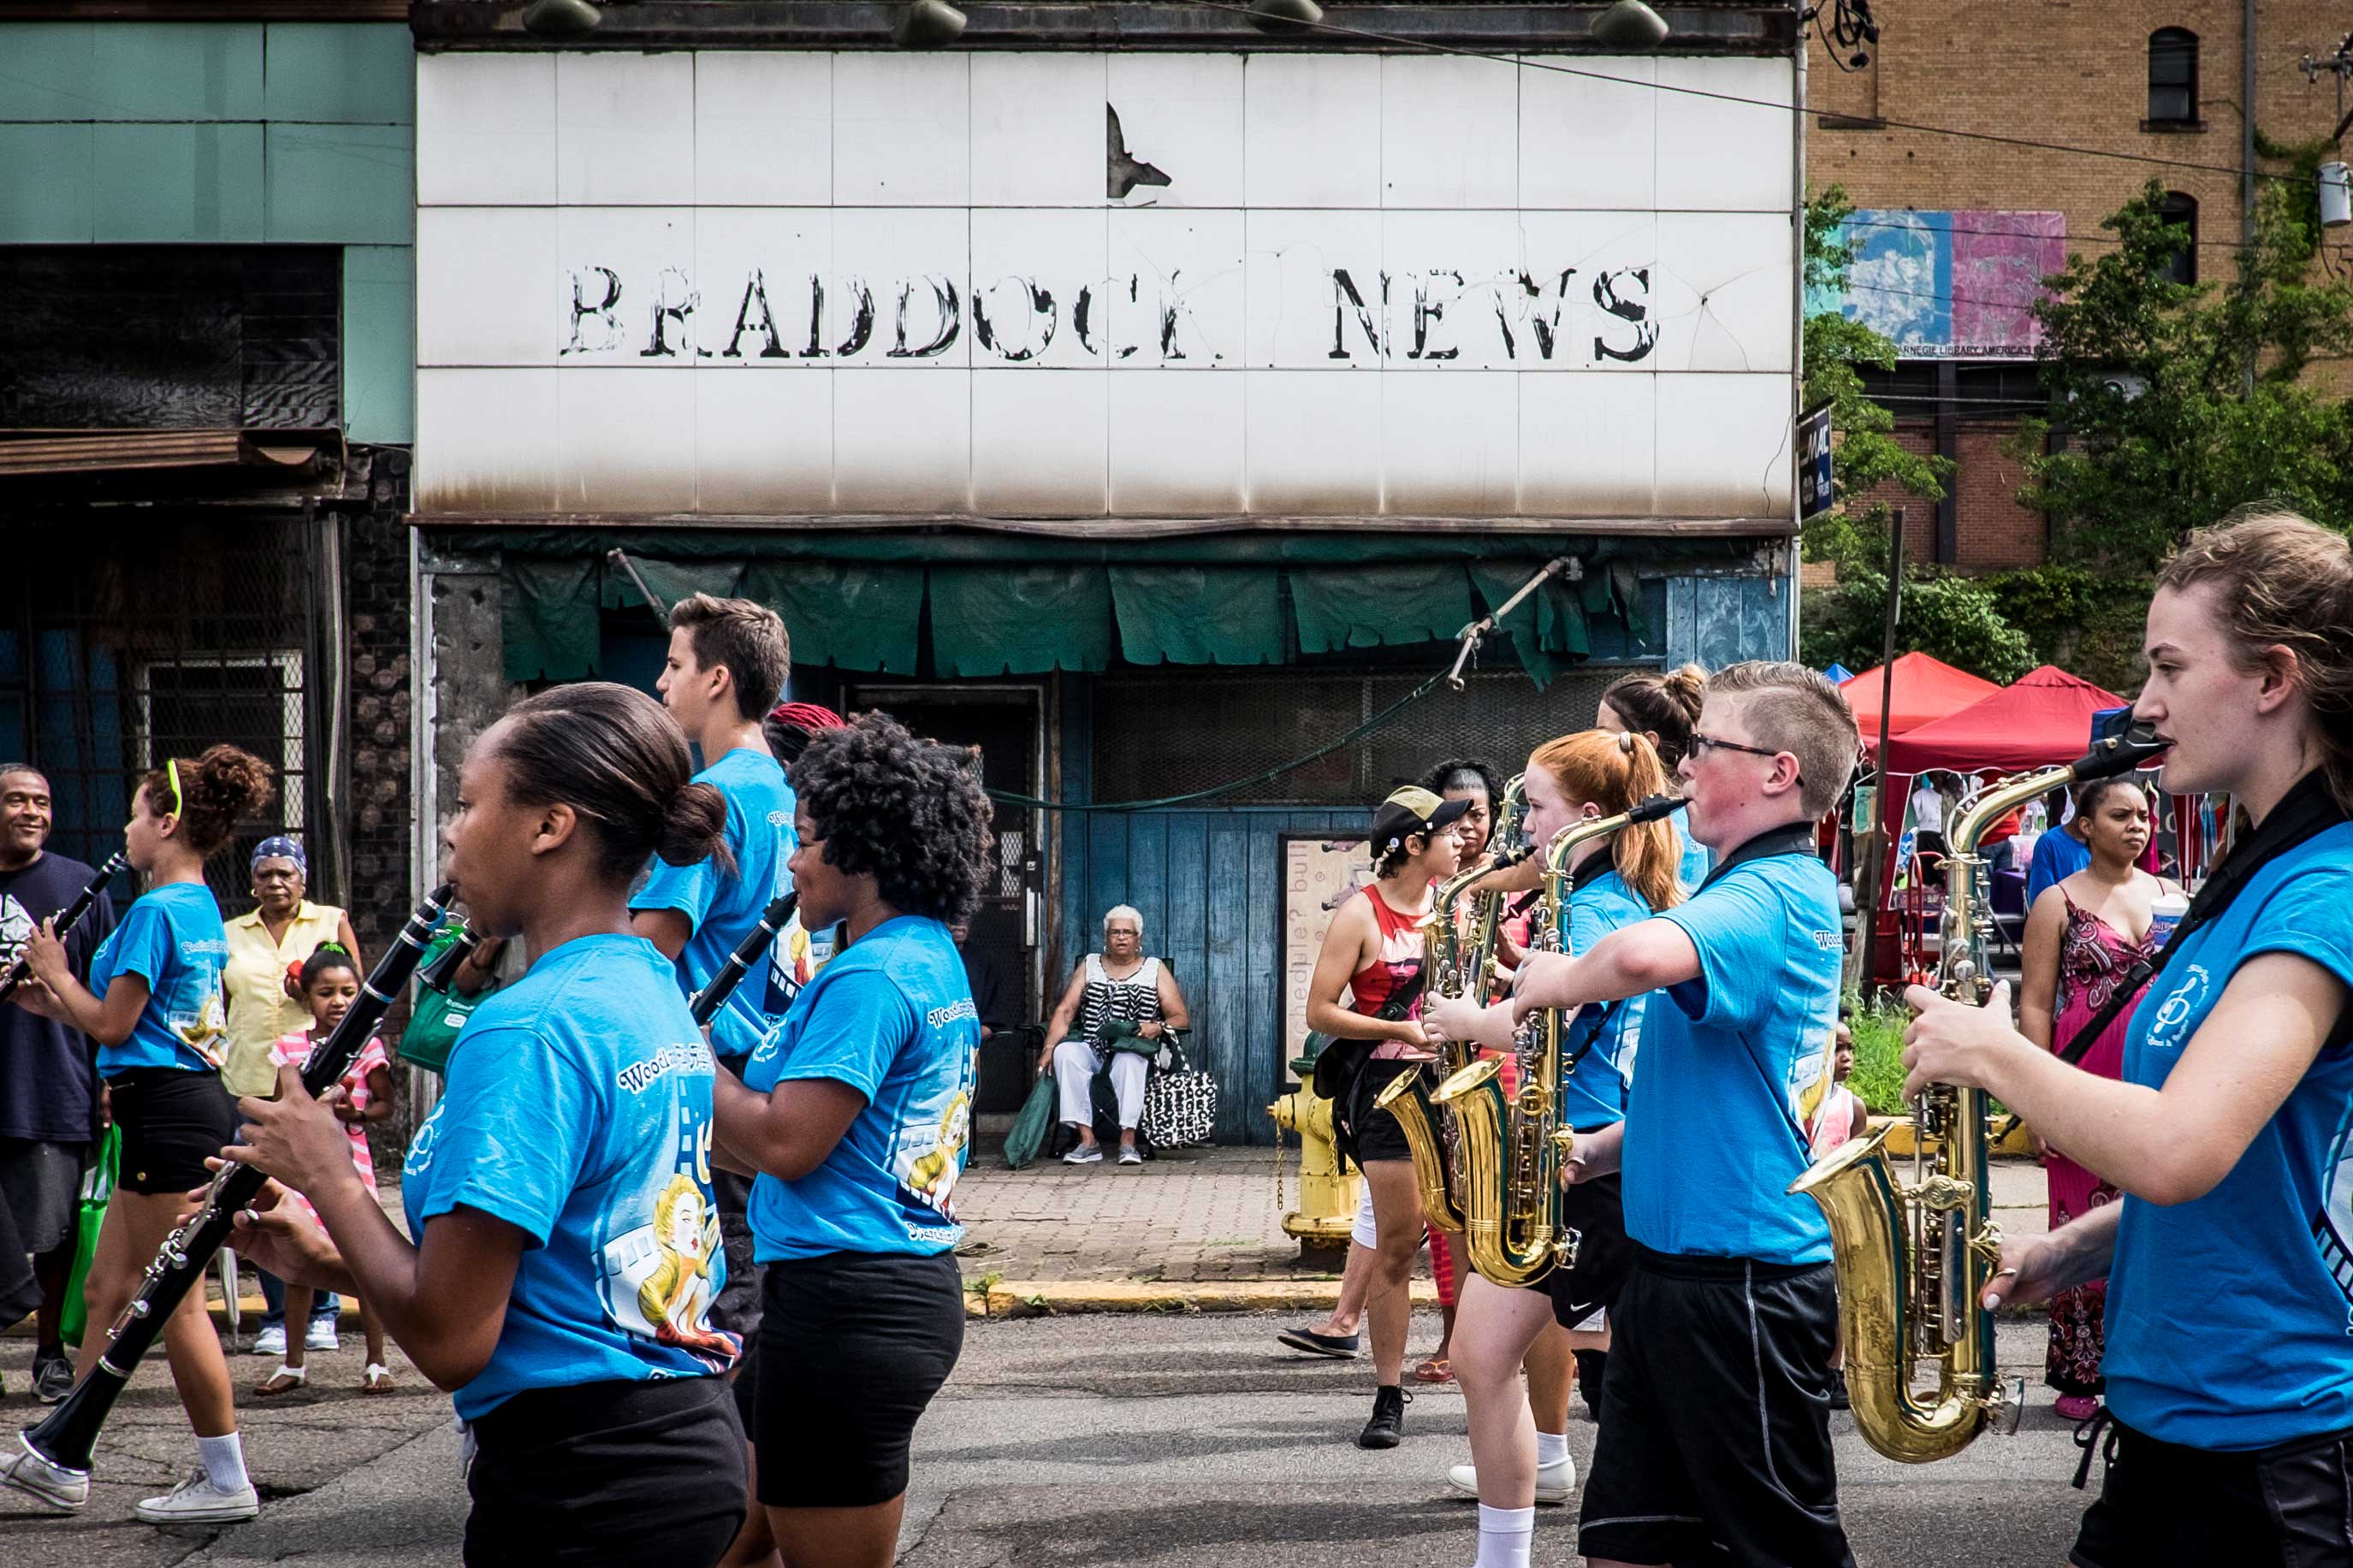 The marching band from nearby Woodland Hills High School passes in front of spectators near the former Braddock News building during the annual Community Day parade in Braddock.